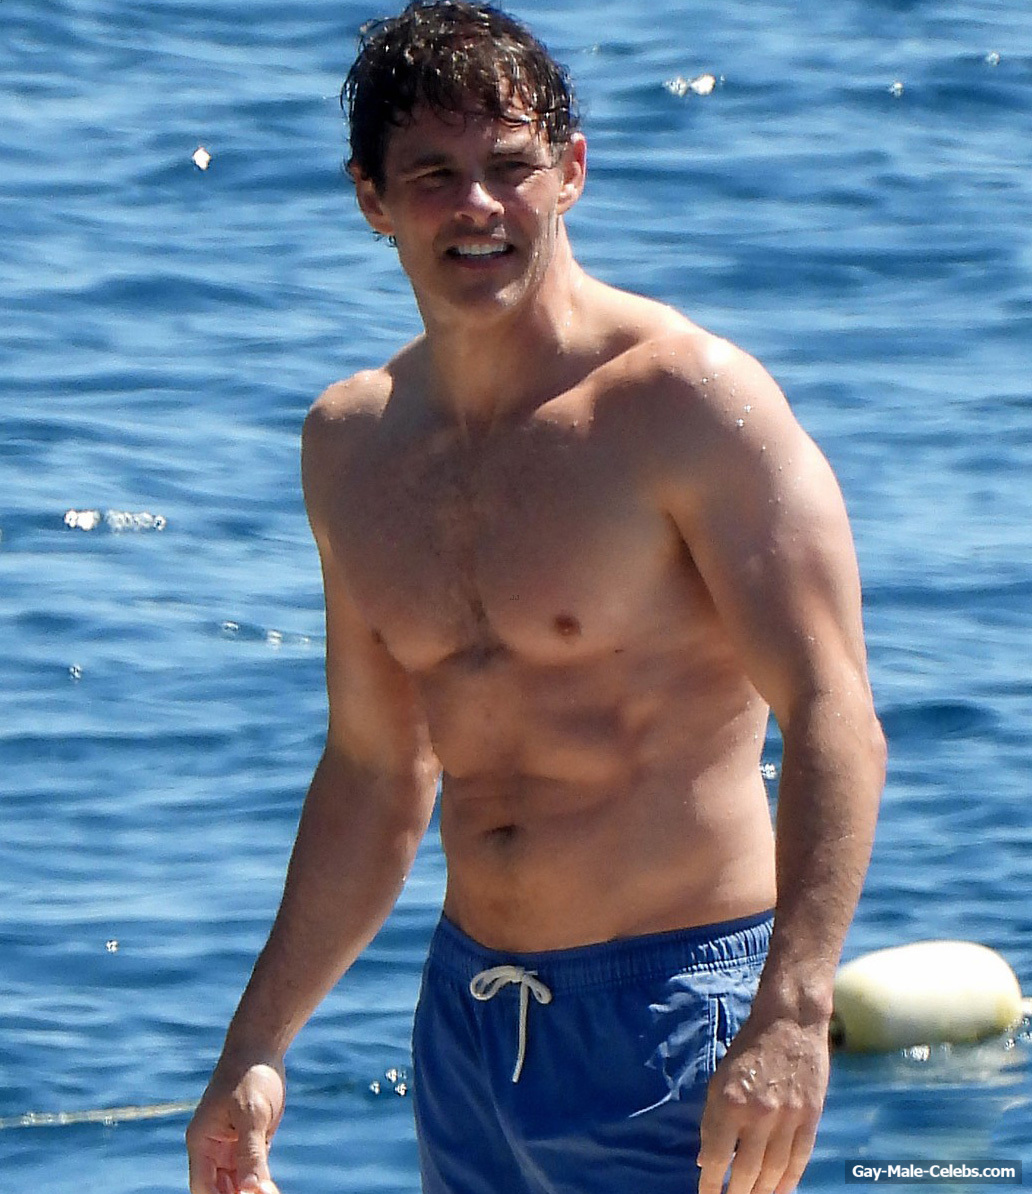 James Marsden Shirtless in South Of France